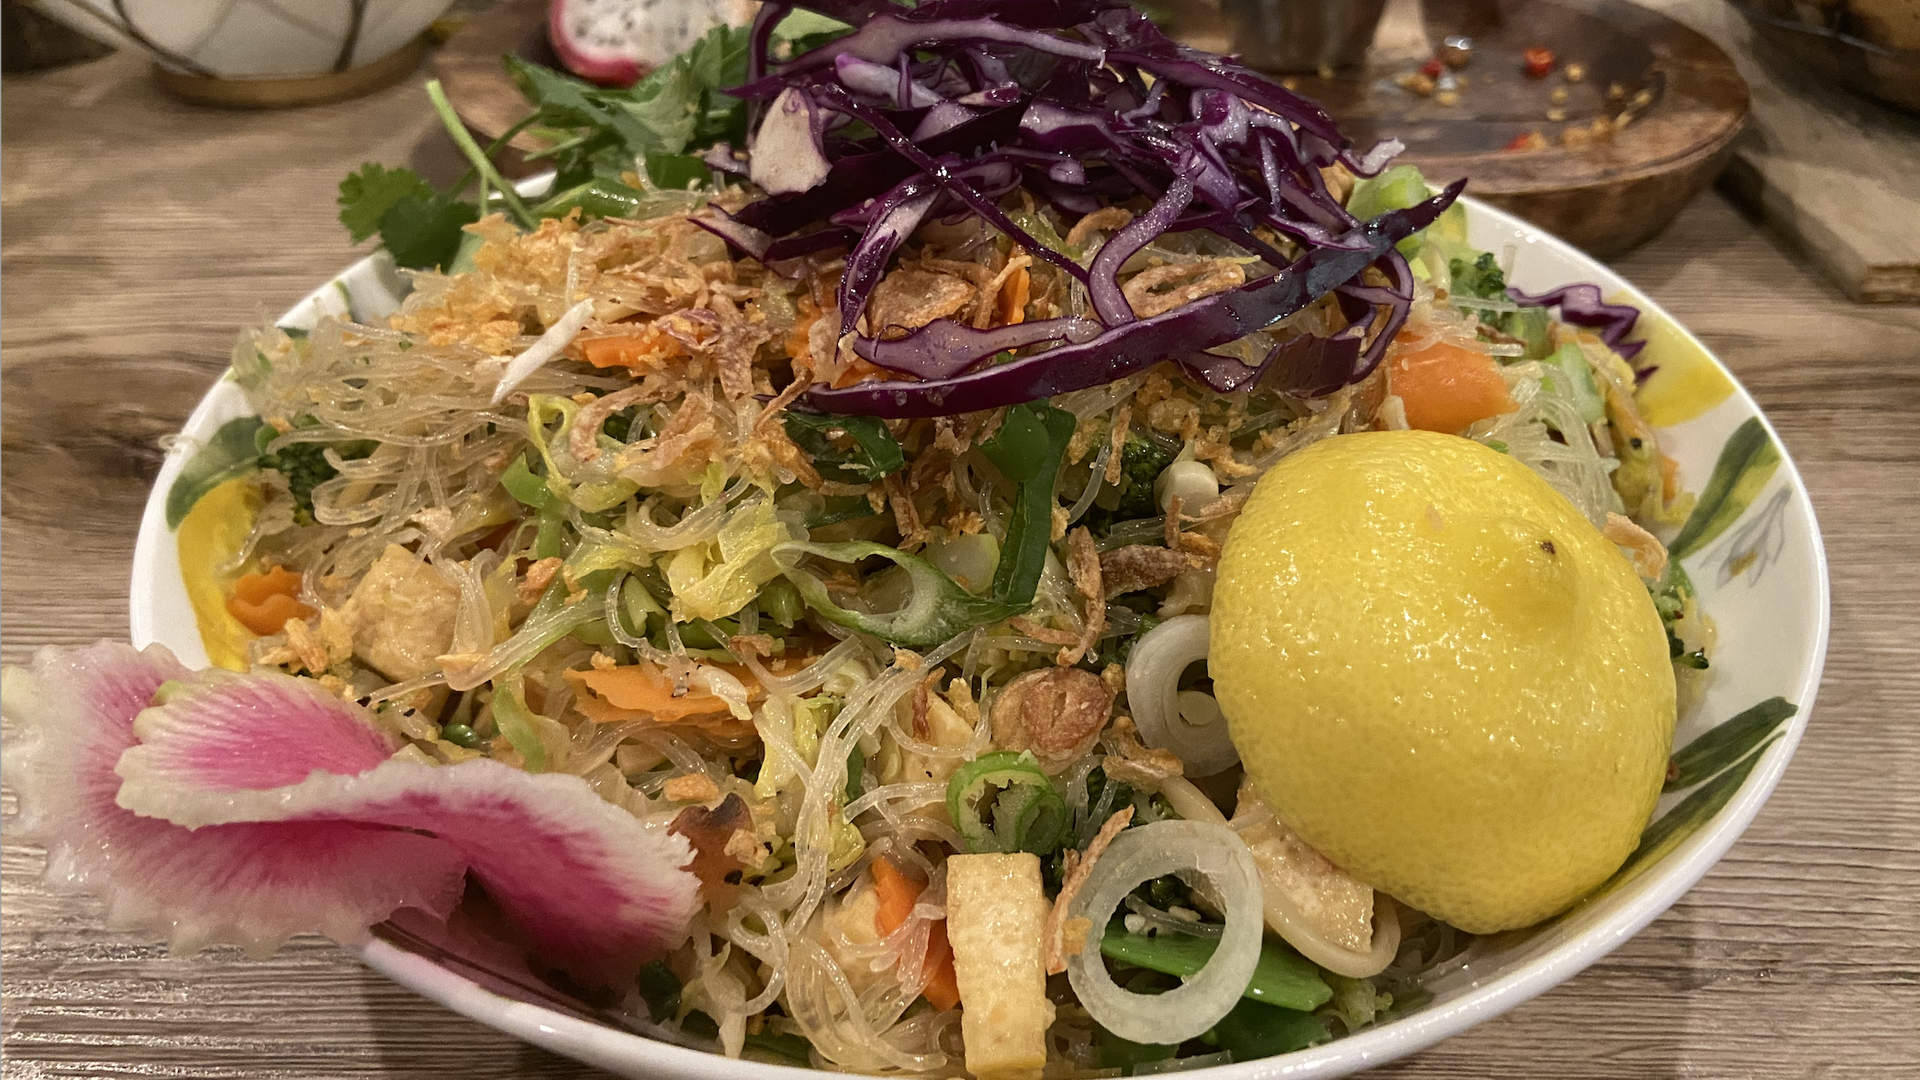 A colorful serving of pancit, a noodle dish covered in a lemon wedge, purple cabbage and watermelon radish 